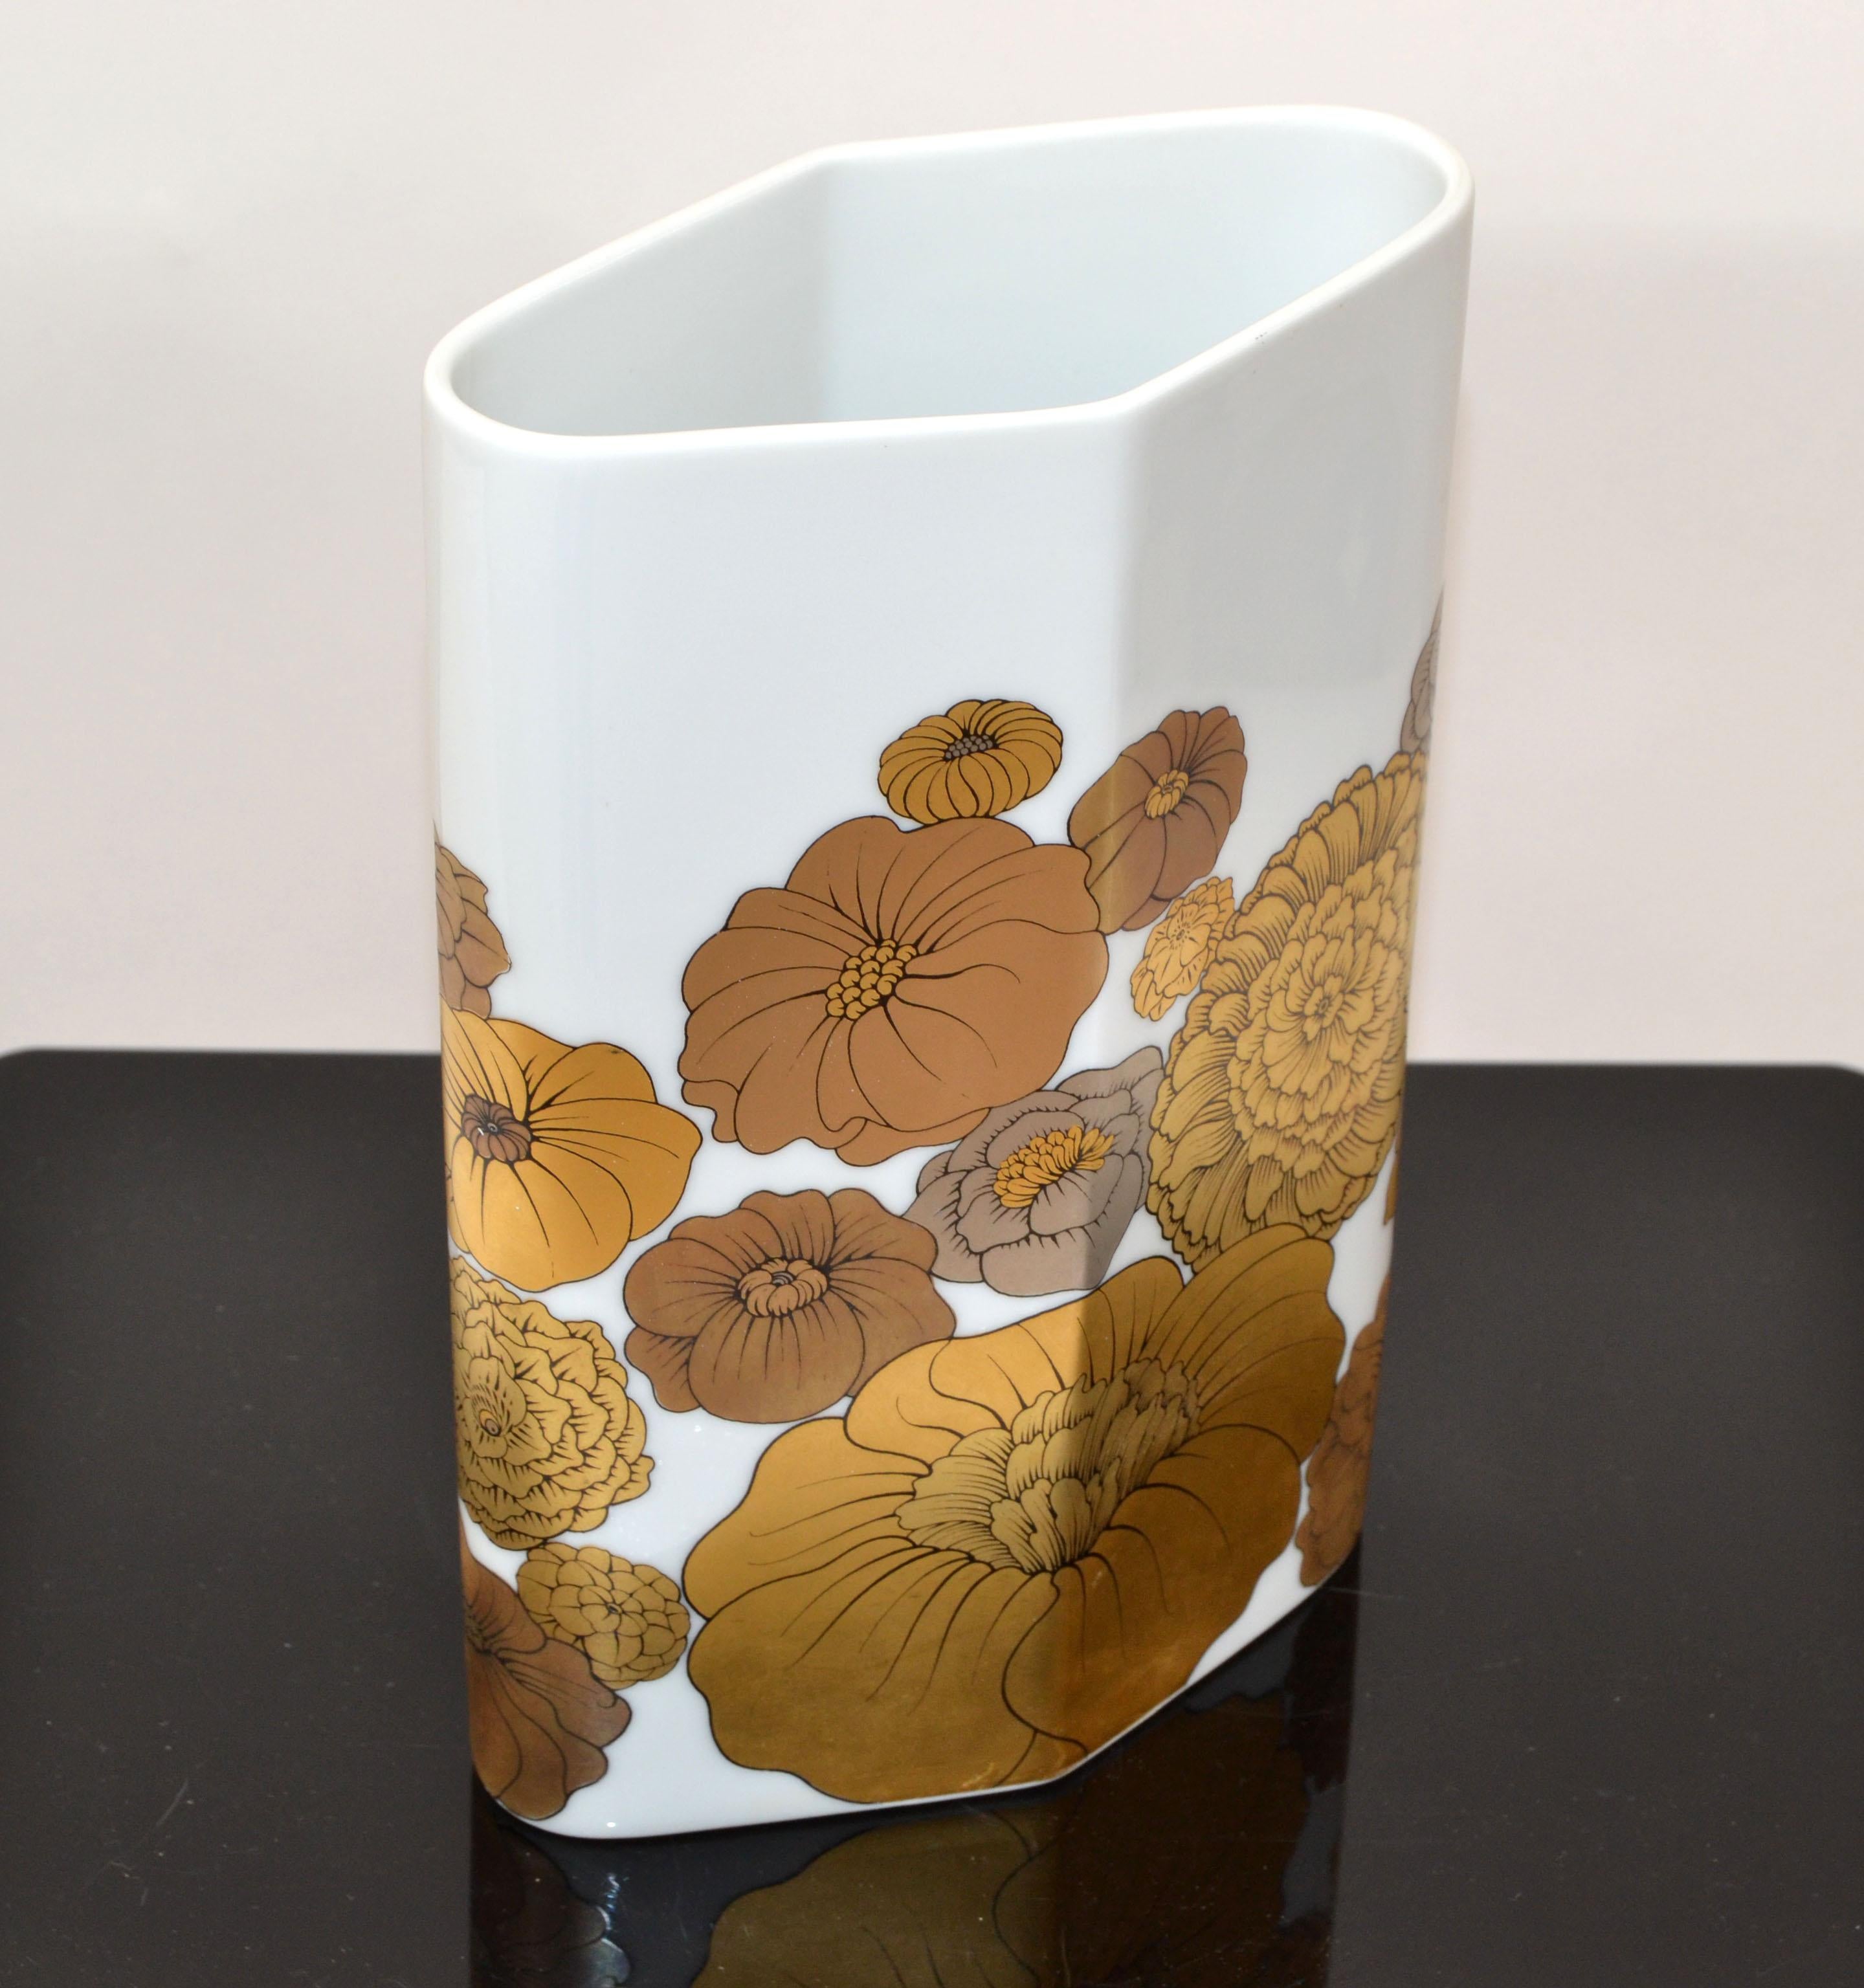 Striking original Rosenthal porcelain hand painted gold flower vase designed by Wolfgang Bauer and made in Germany for Studio-Linie.
The vase features a variety of blossoms in gold.
Marked Rosenthal Studio-Linie Germany at the base.
Limited Art